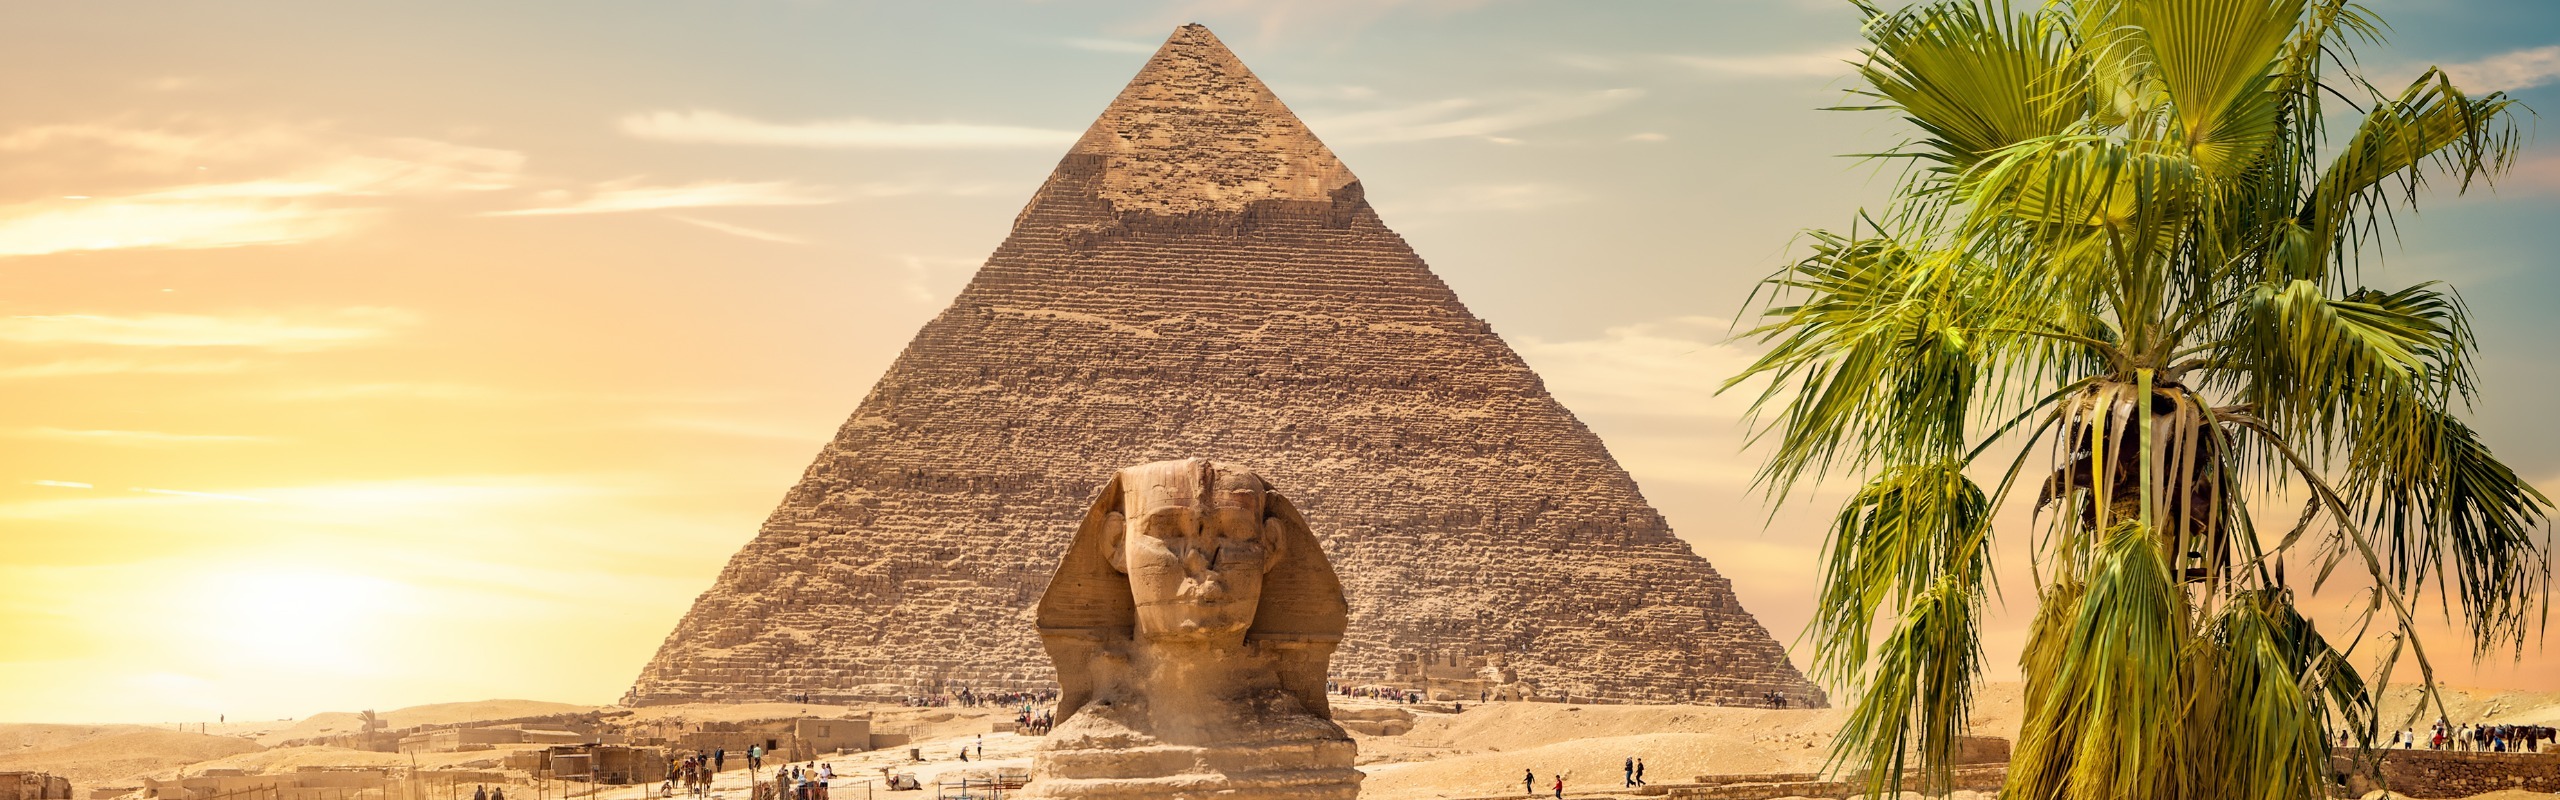 The Architecture of Egypt’s Pyramids: Secret of Outside and Inside 